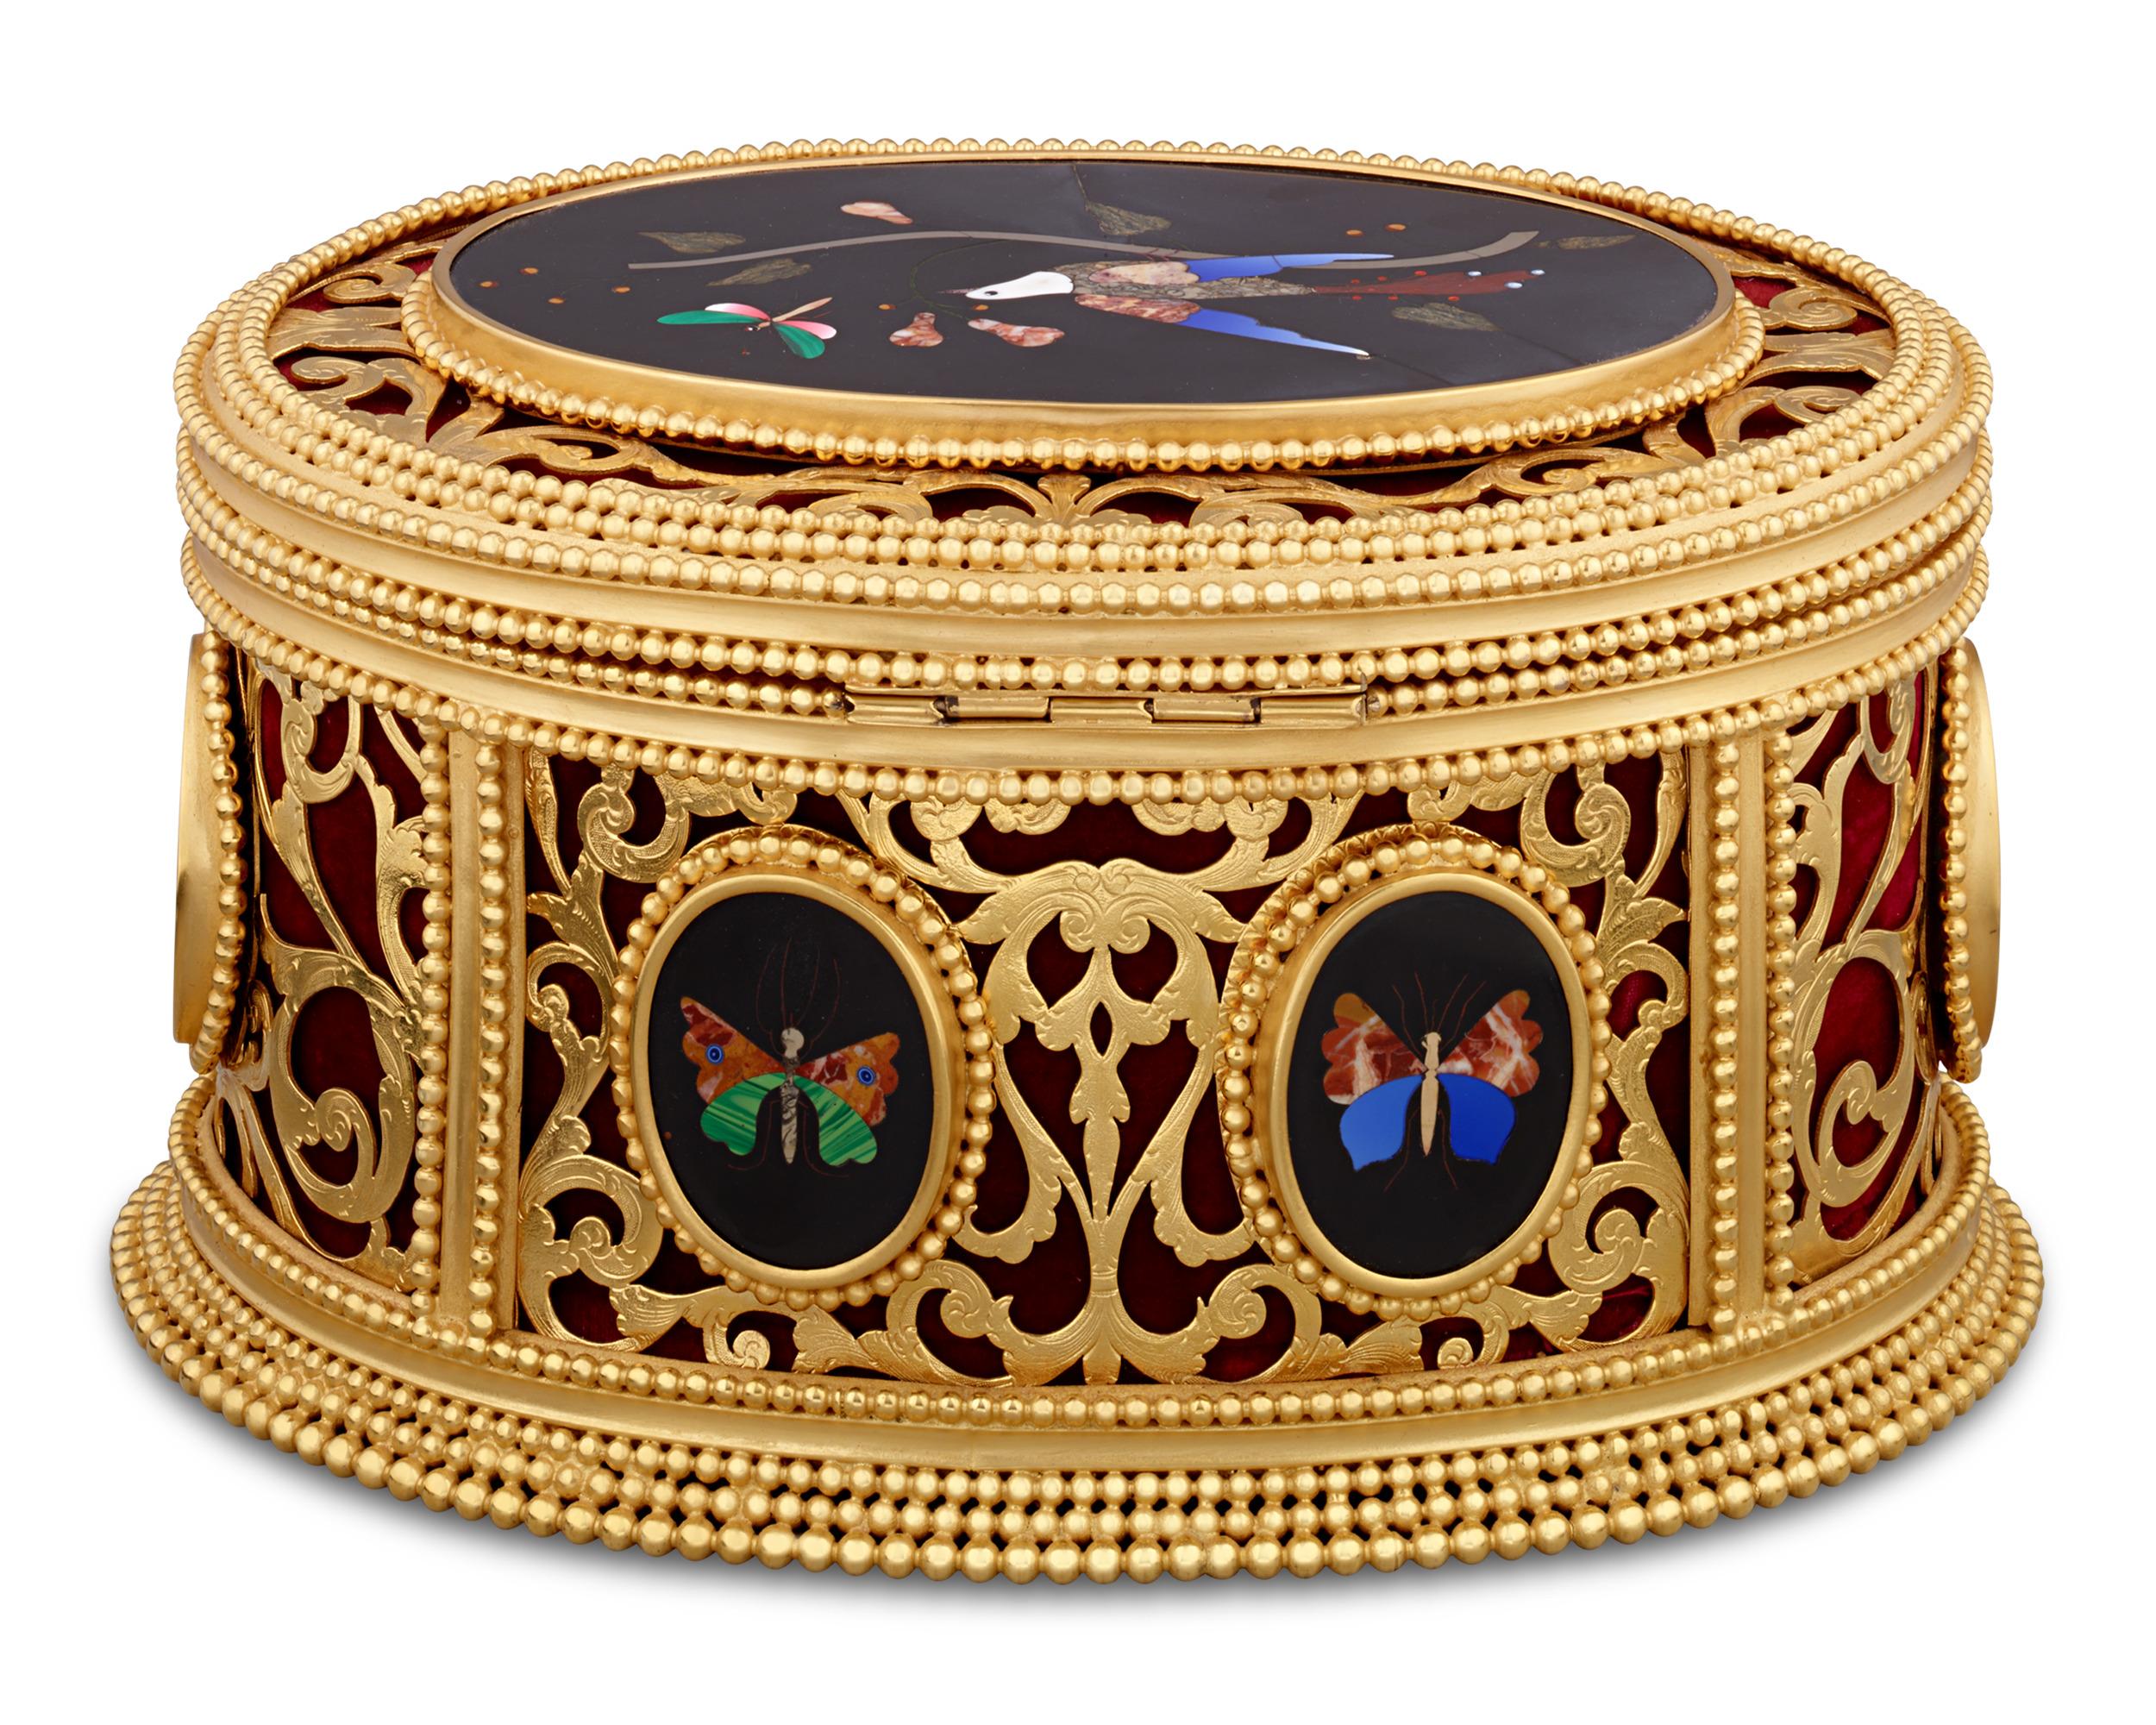 Empire Pietre Dure And Doré Bronze Box By Tahan For Sale